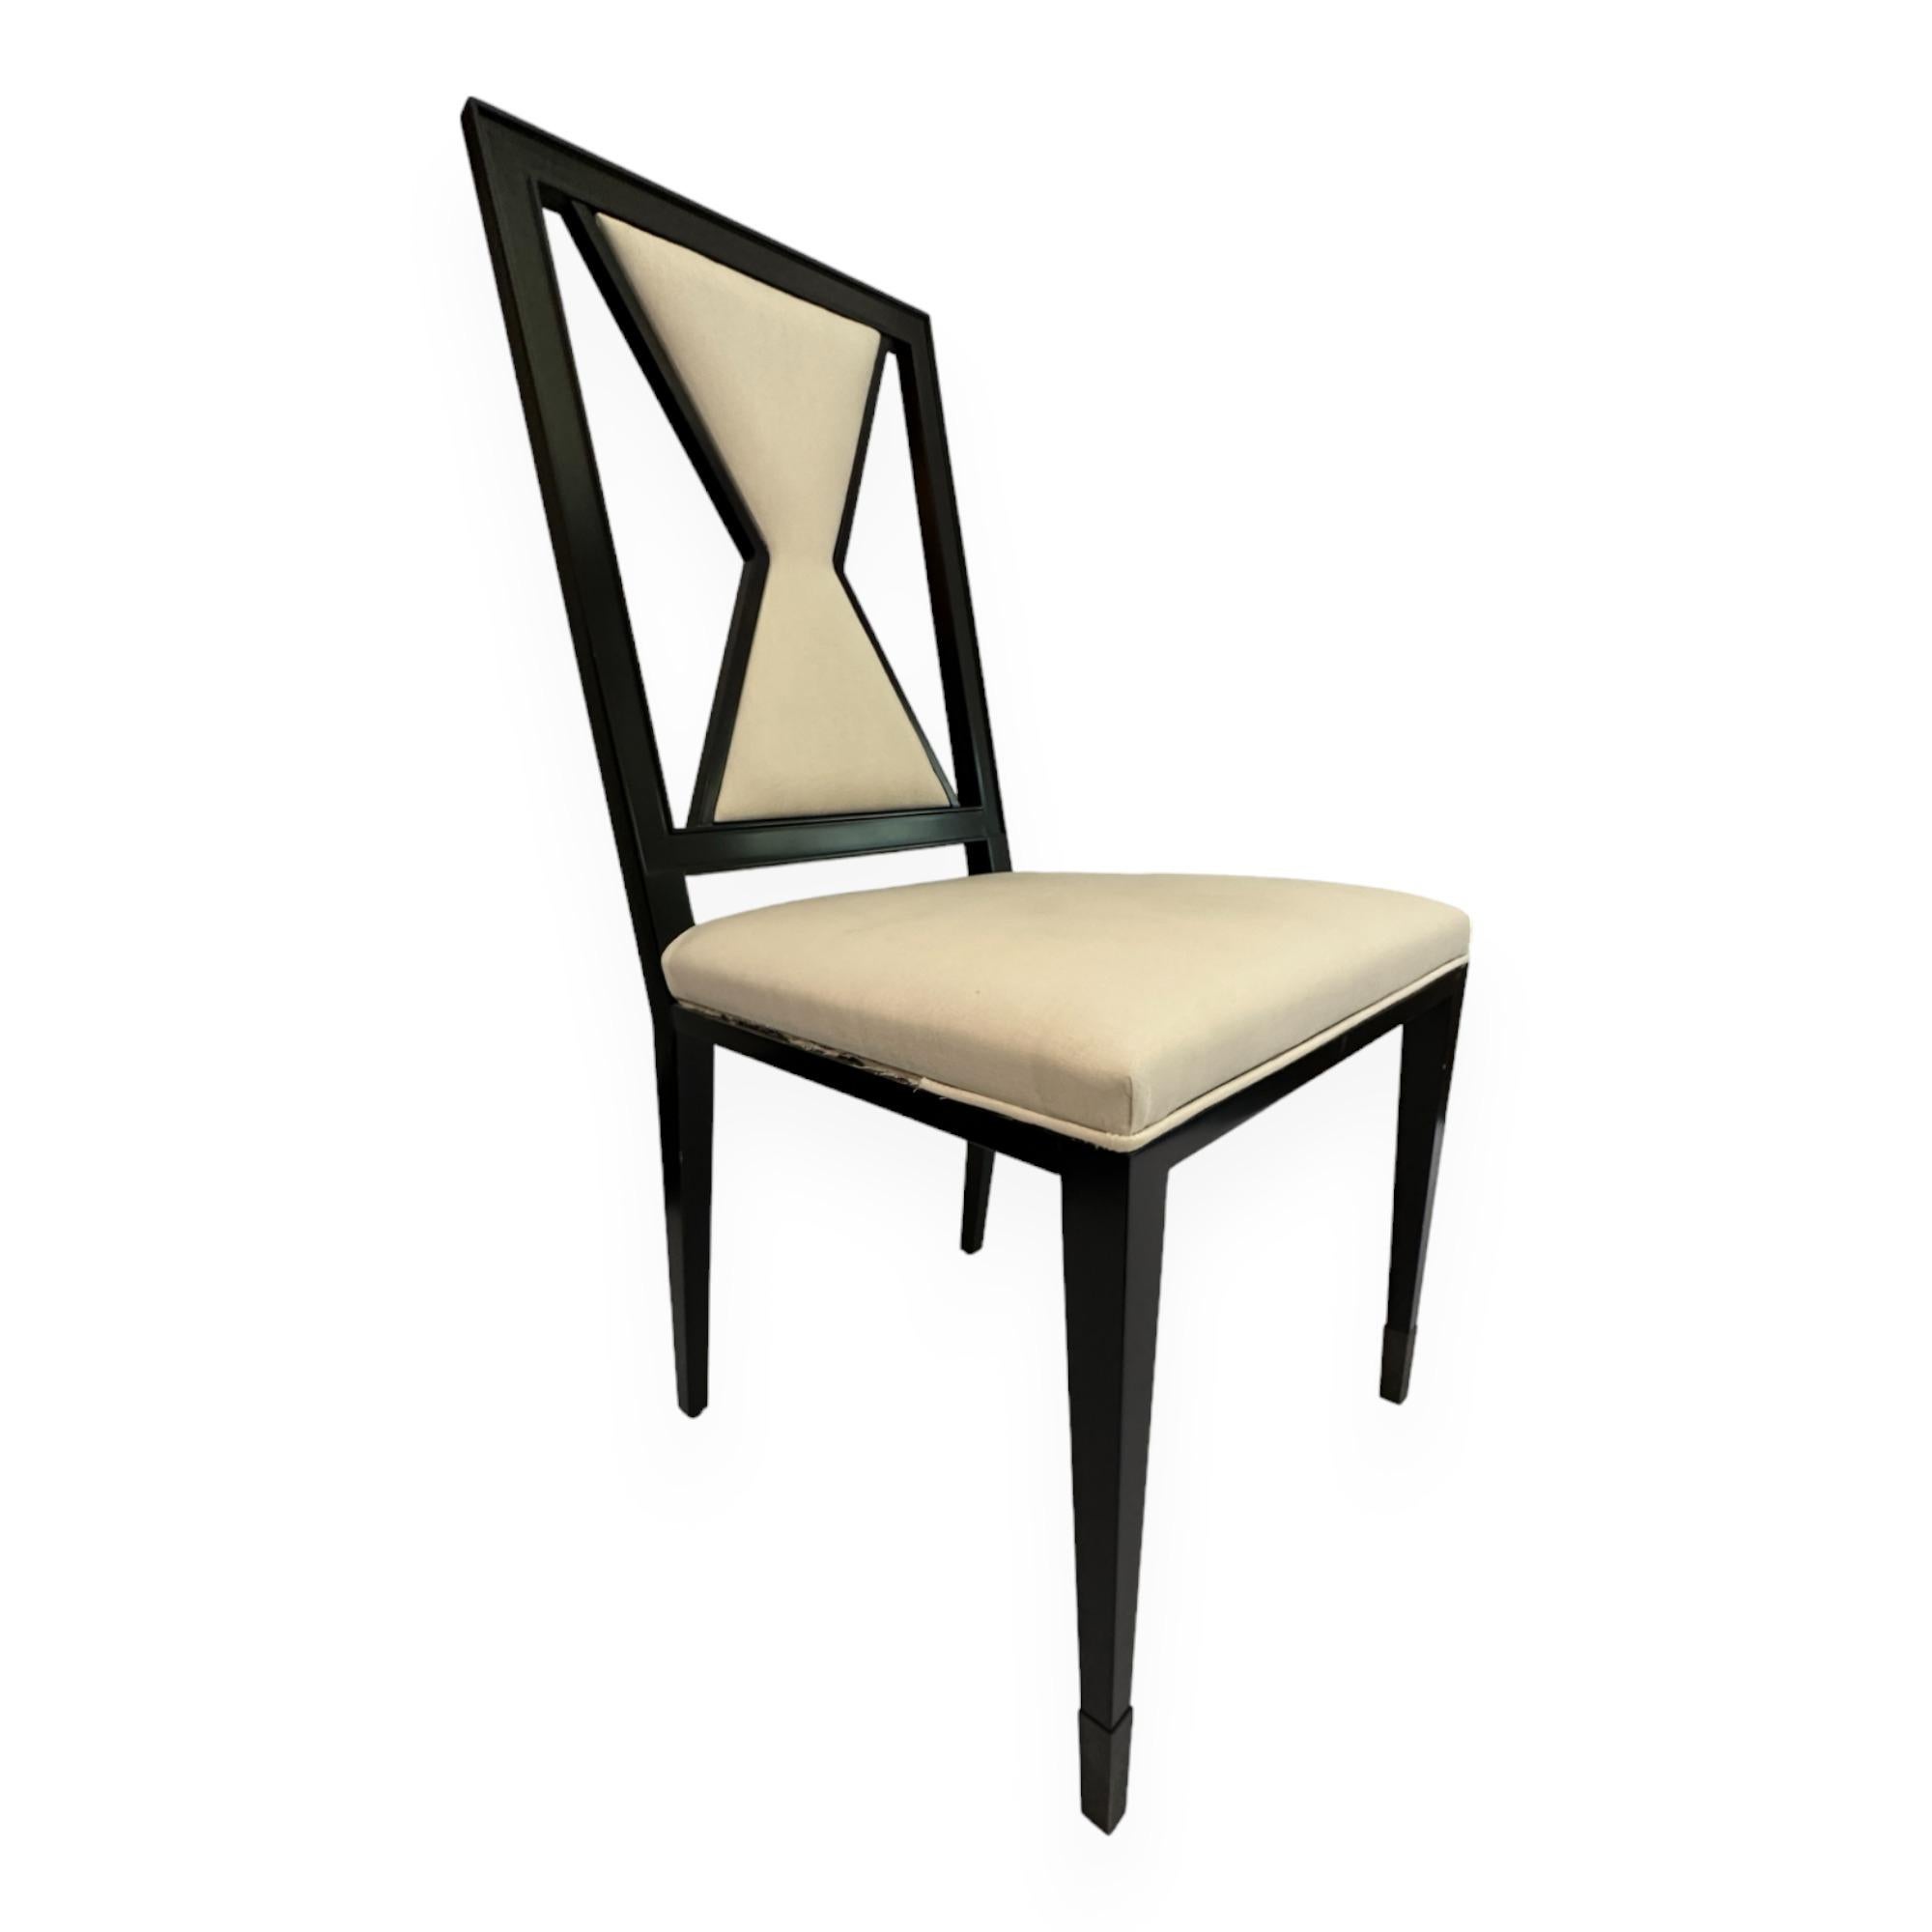 Contemporary wooden armchair design by Juan Montoya. This unique black lacquered piece has a geometric shaped backrest. Its design and color allows for different upholstery fabric and patterns. 